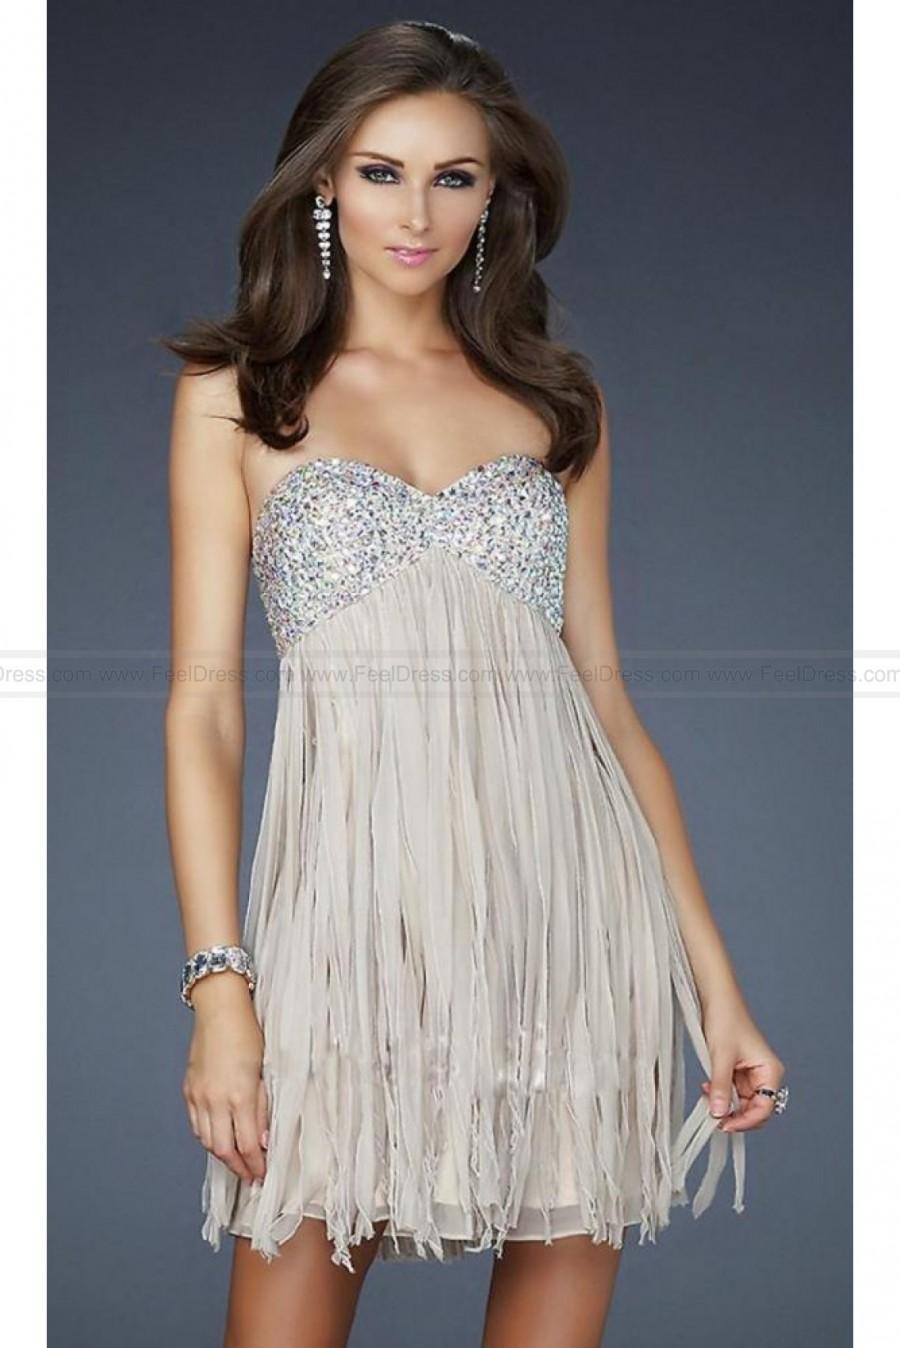 Wedding - A-line Strapless Chiffon Cocktail Dress with beads fringe